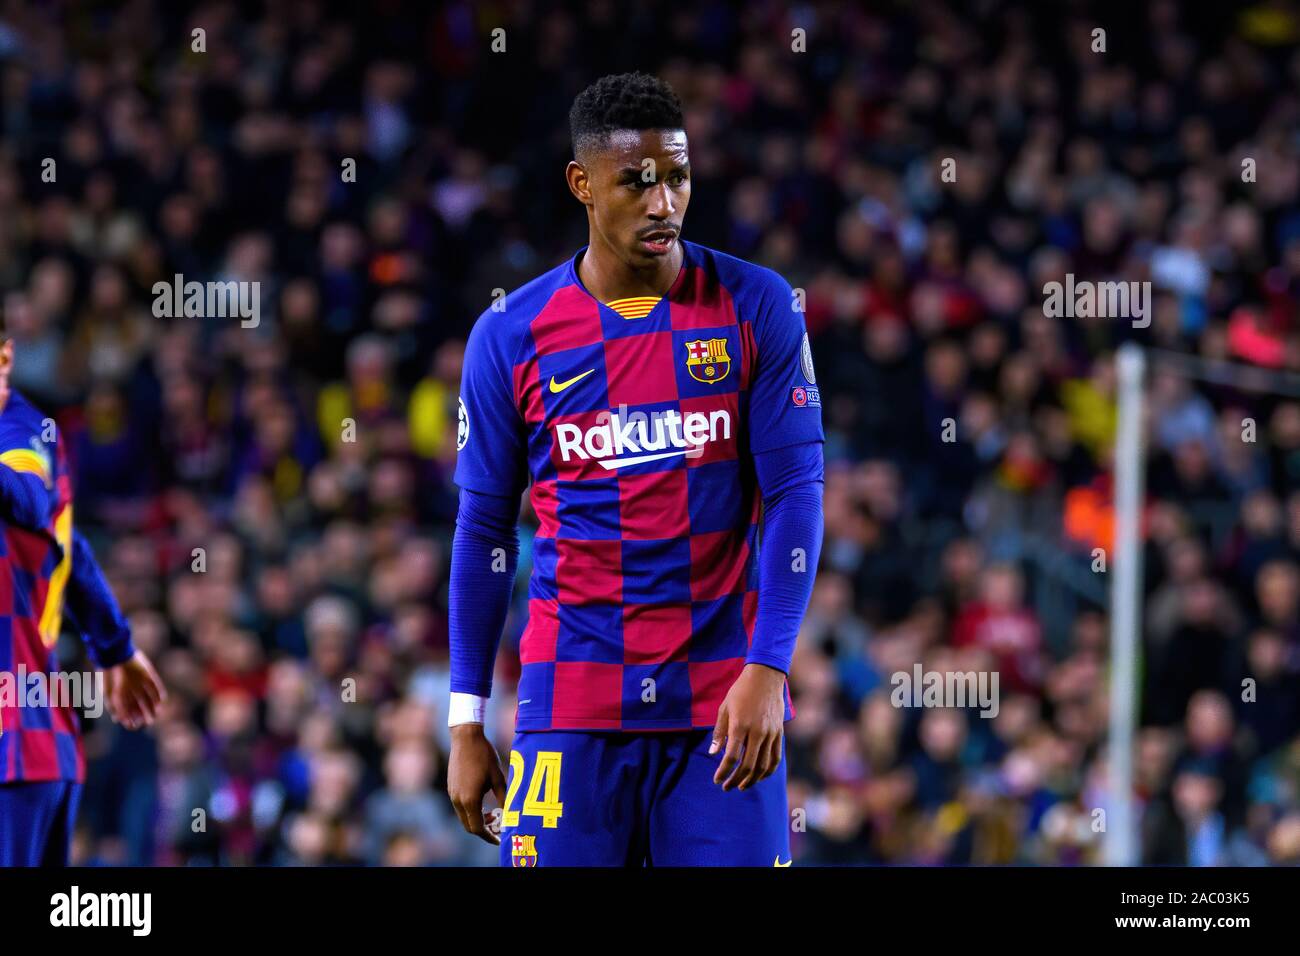 BARCELONA - NOV 27: Junior Firpo plays at the Champions League match between FC Barcelona and Borussia Dortmund at the Camp Nou Stadium on November 27 Stock Photo